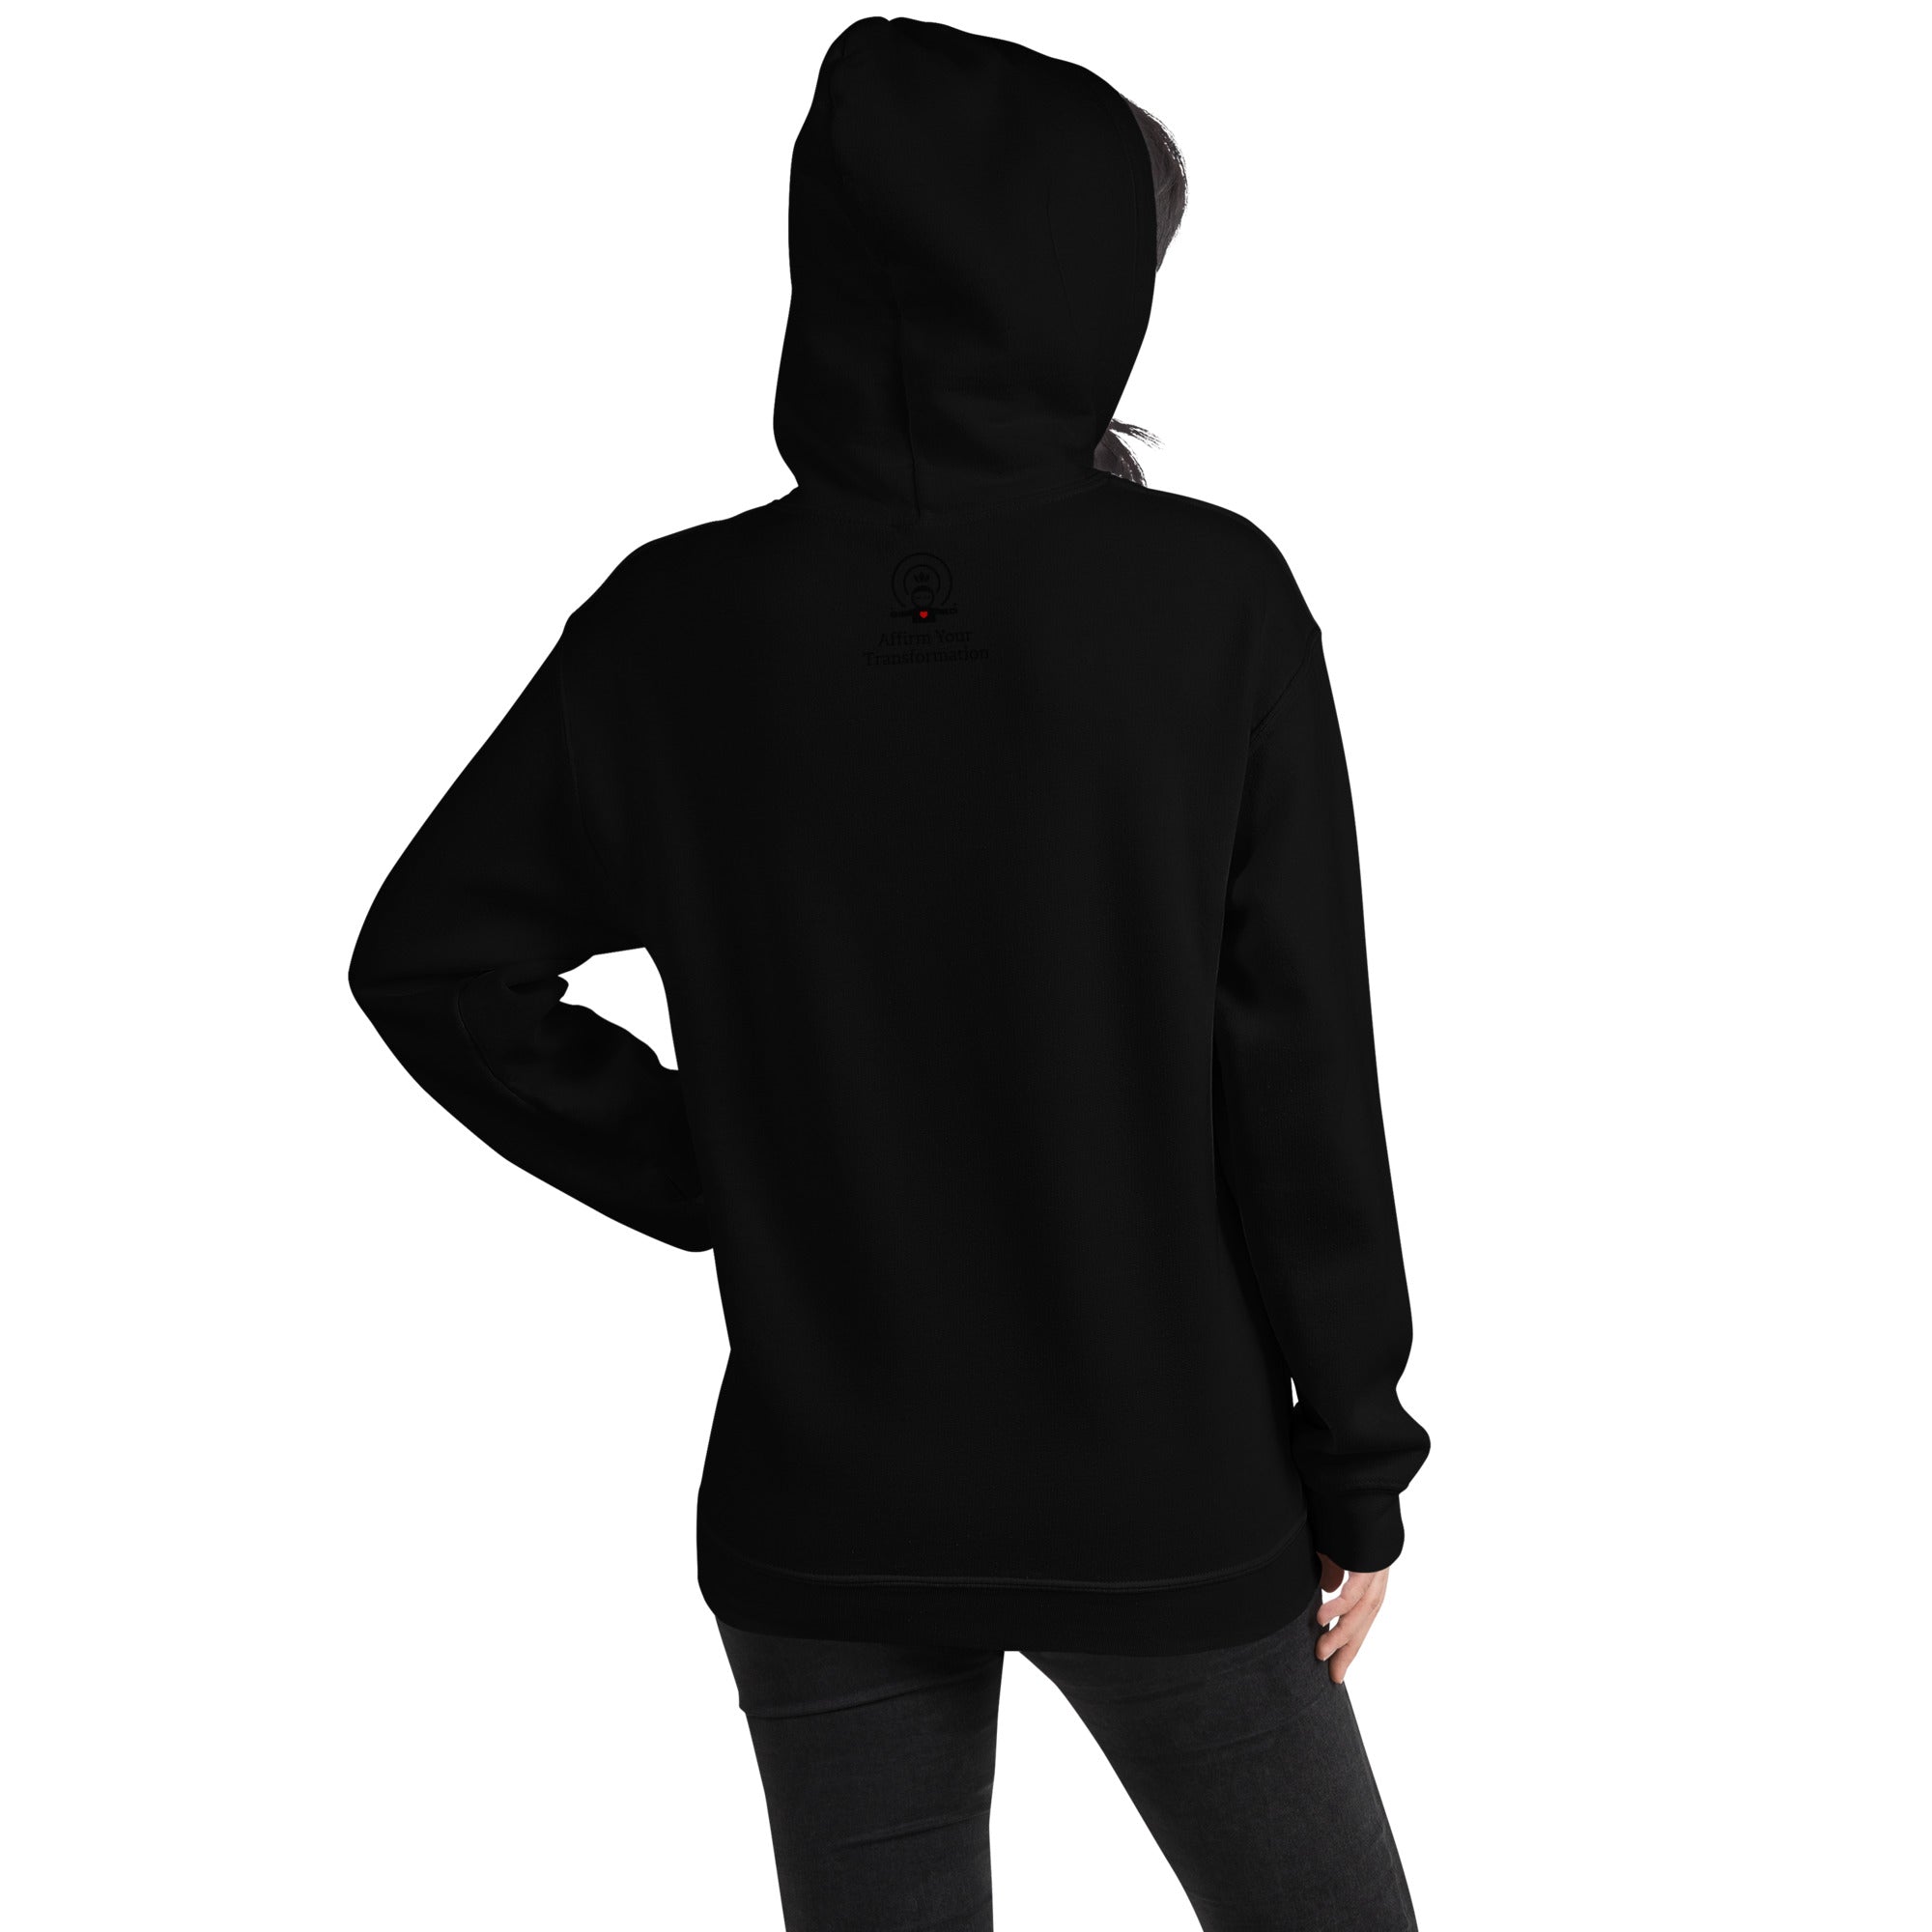 I AM AMAZING Mirror Affirmation Hoodie (Black Text) - 10 COLORS!